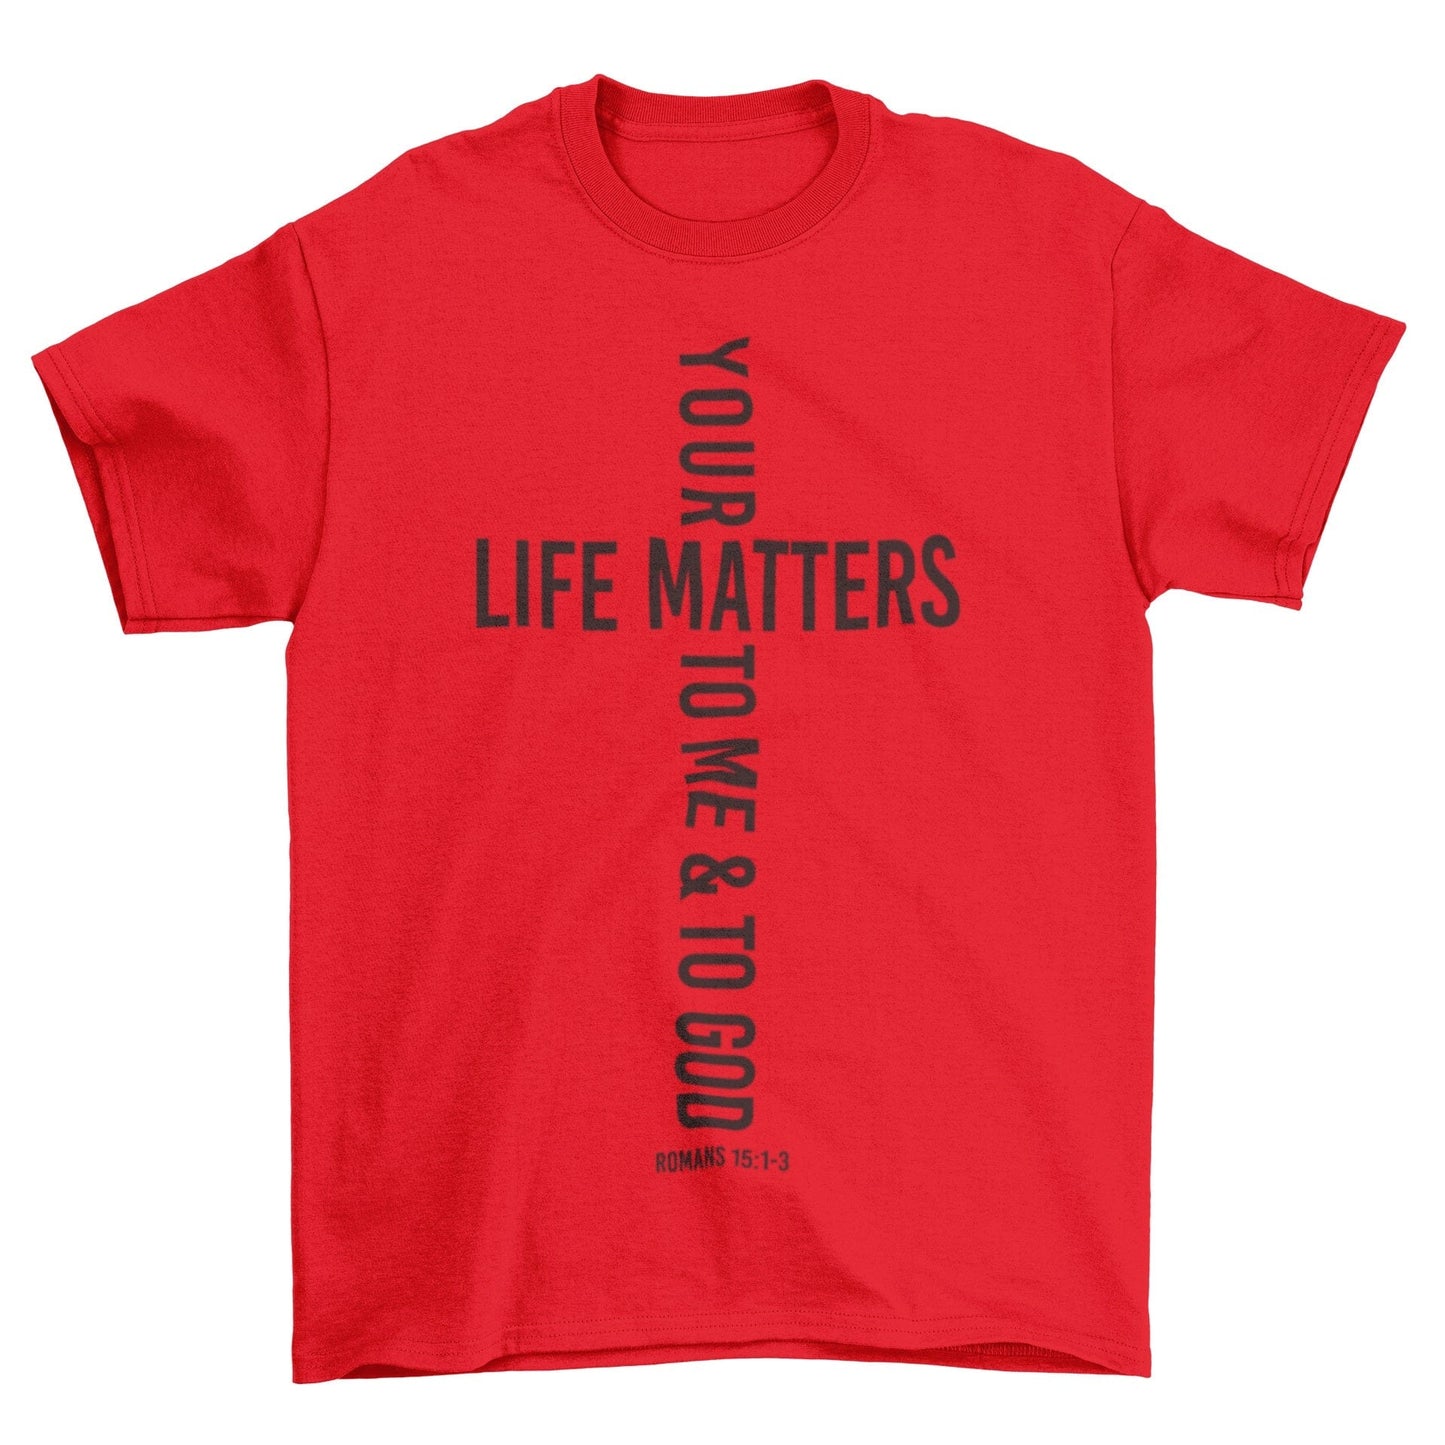 Wrighteous Wear T-Shirt S / Red Your Life Matters Unisex Christian T-shirt